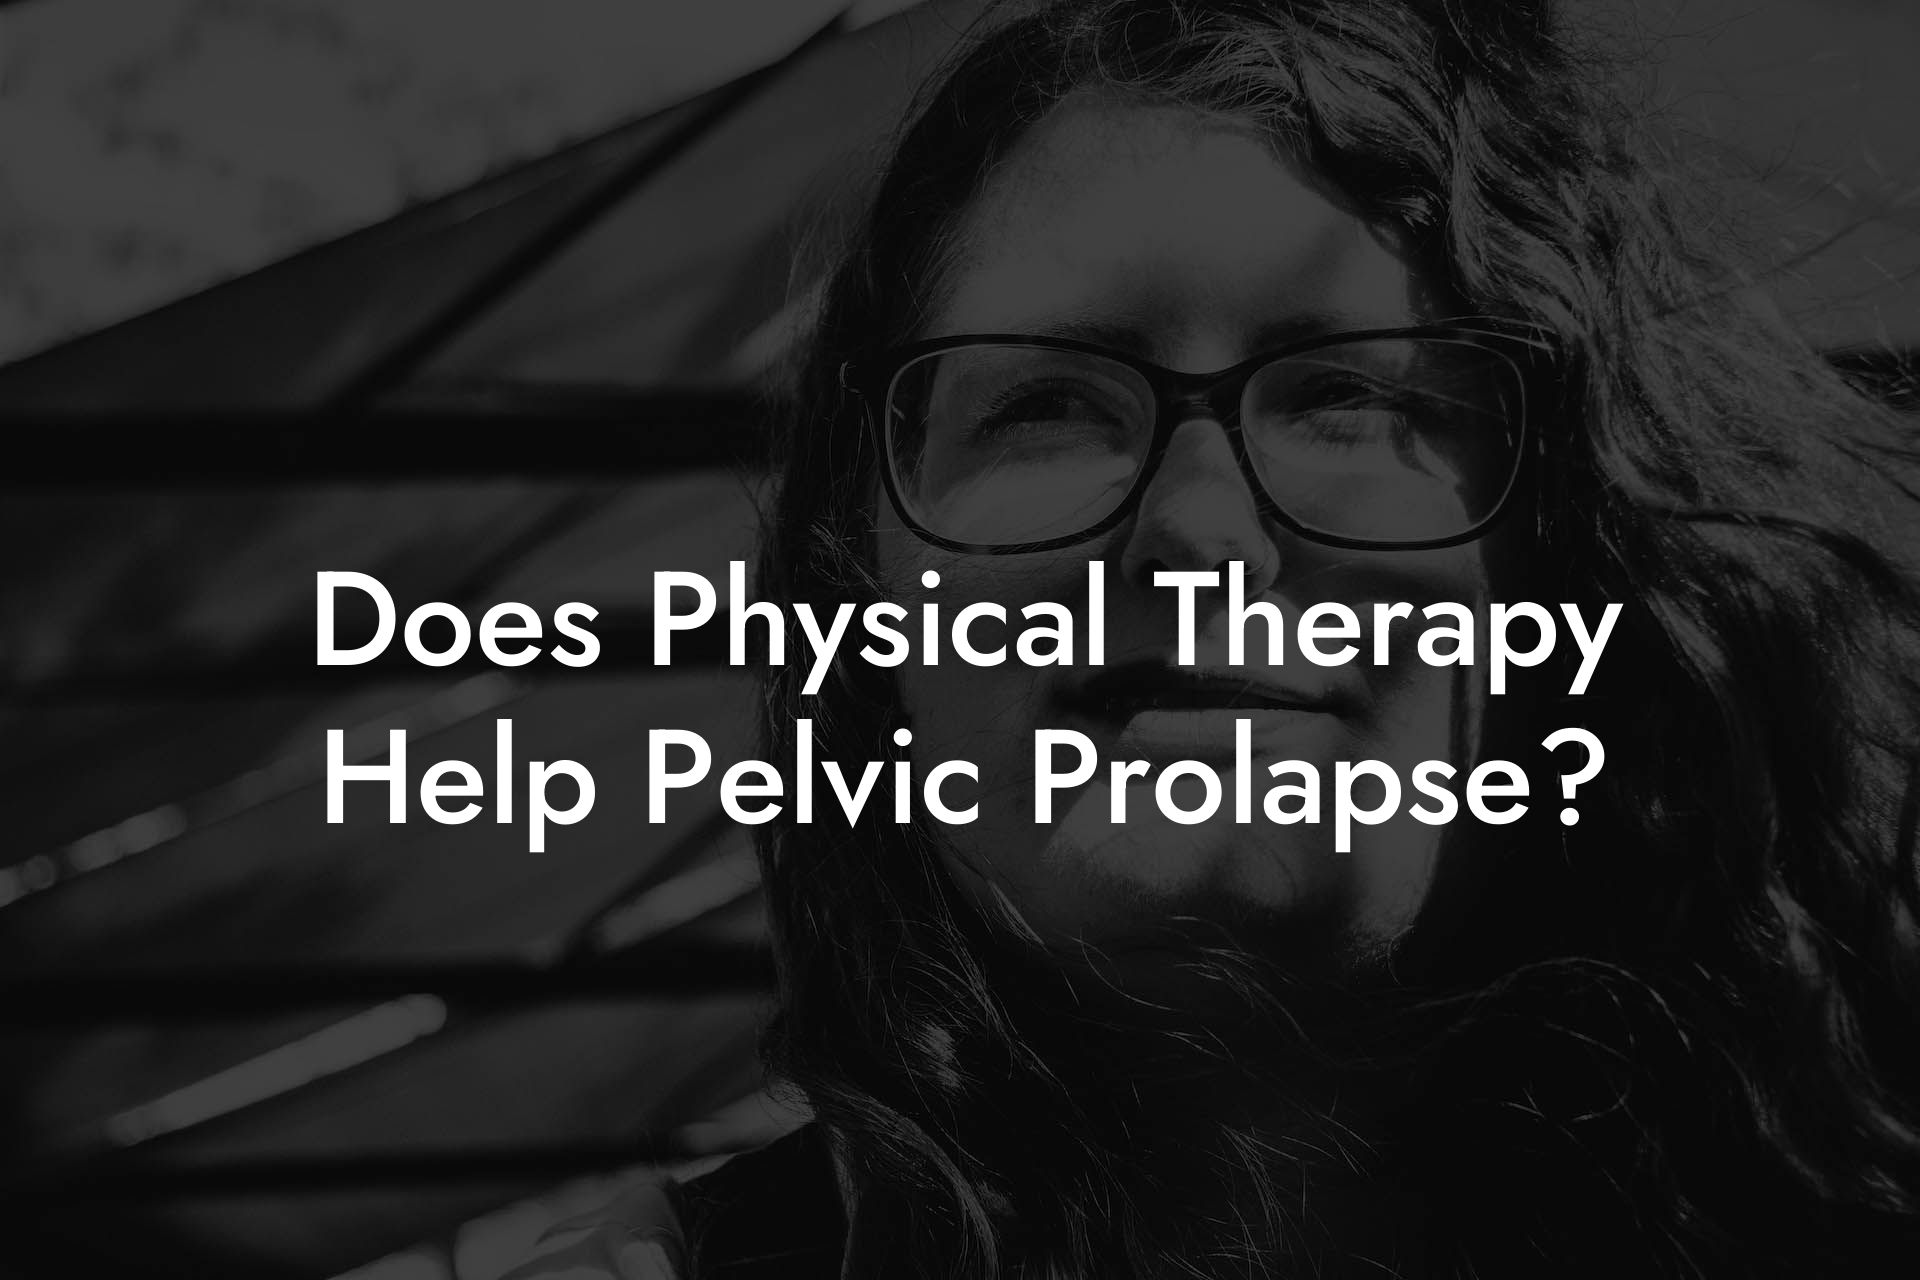 Does Physical Therapy Help Pelvic Prolapse?